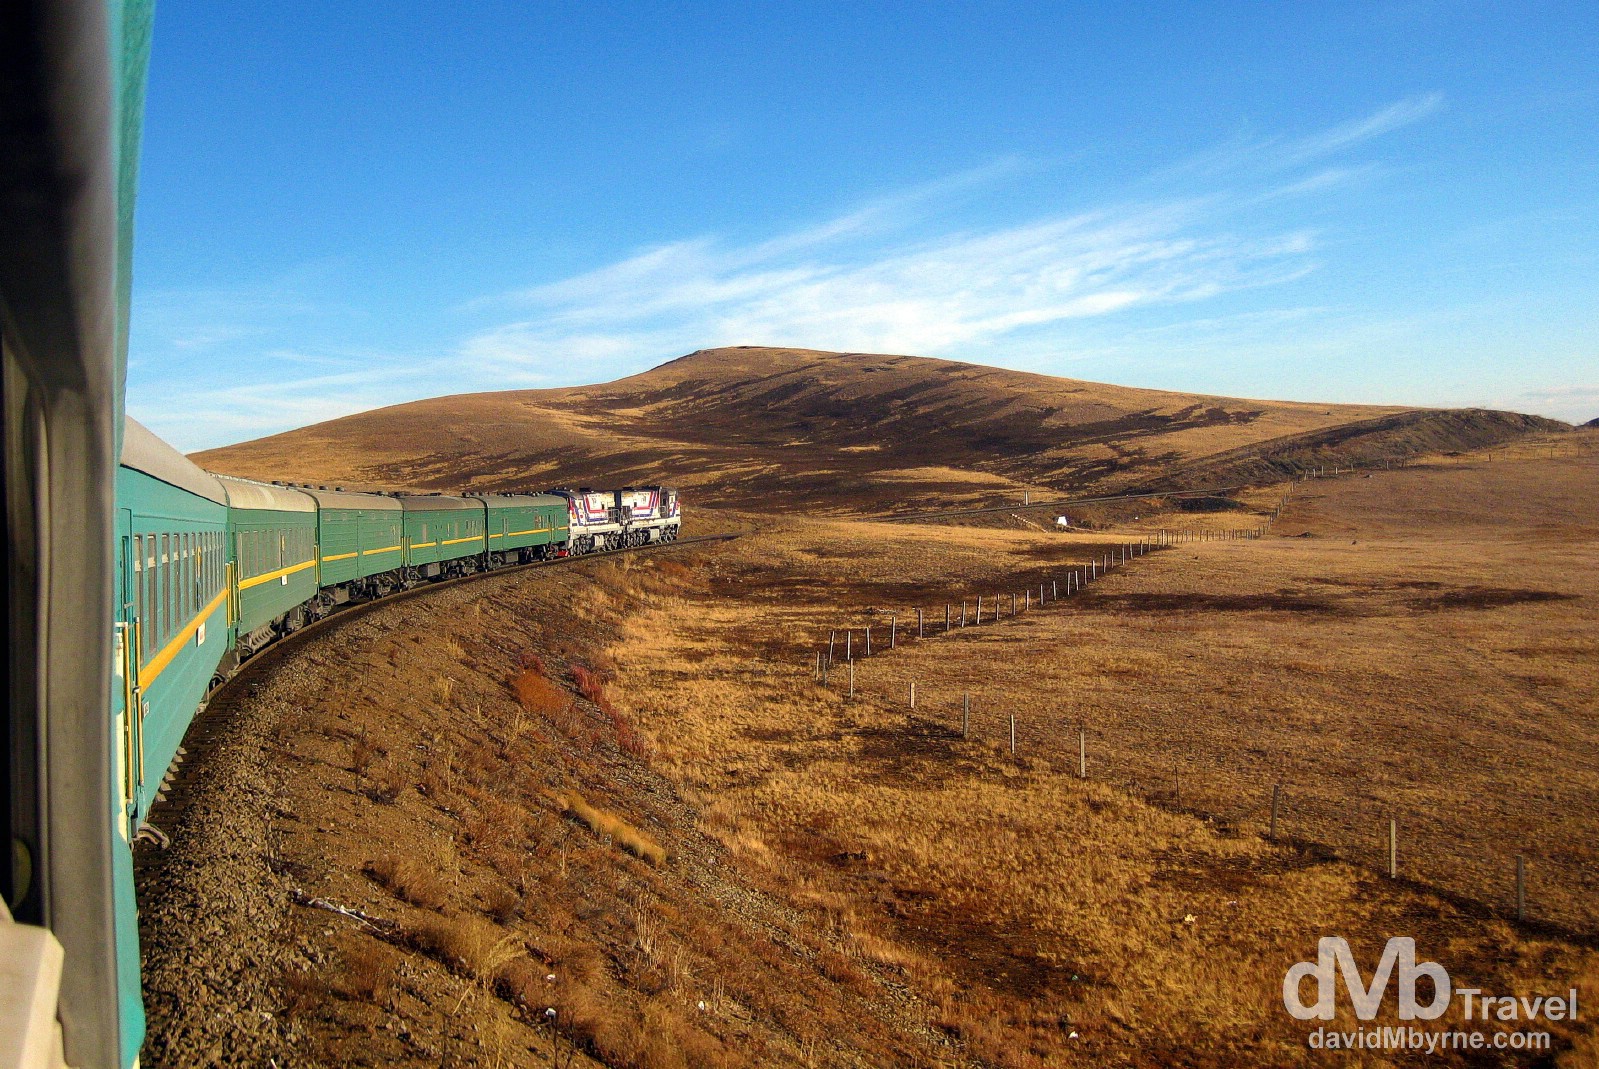 Travelling through the Mongolian grasslands en route to the Mongolian capital of Ulan Bator. October 31st 2012.